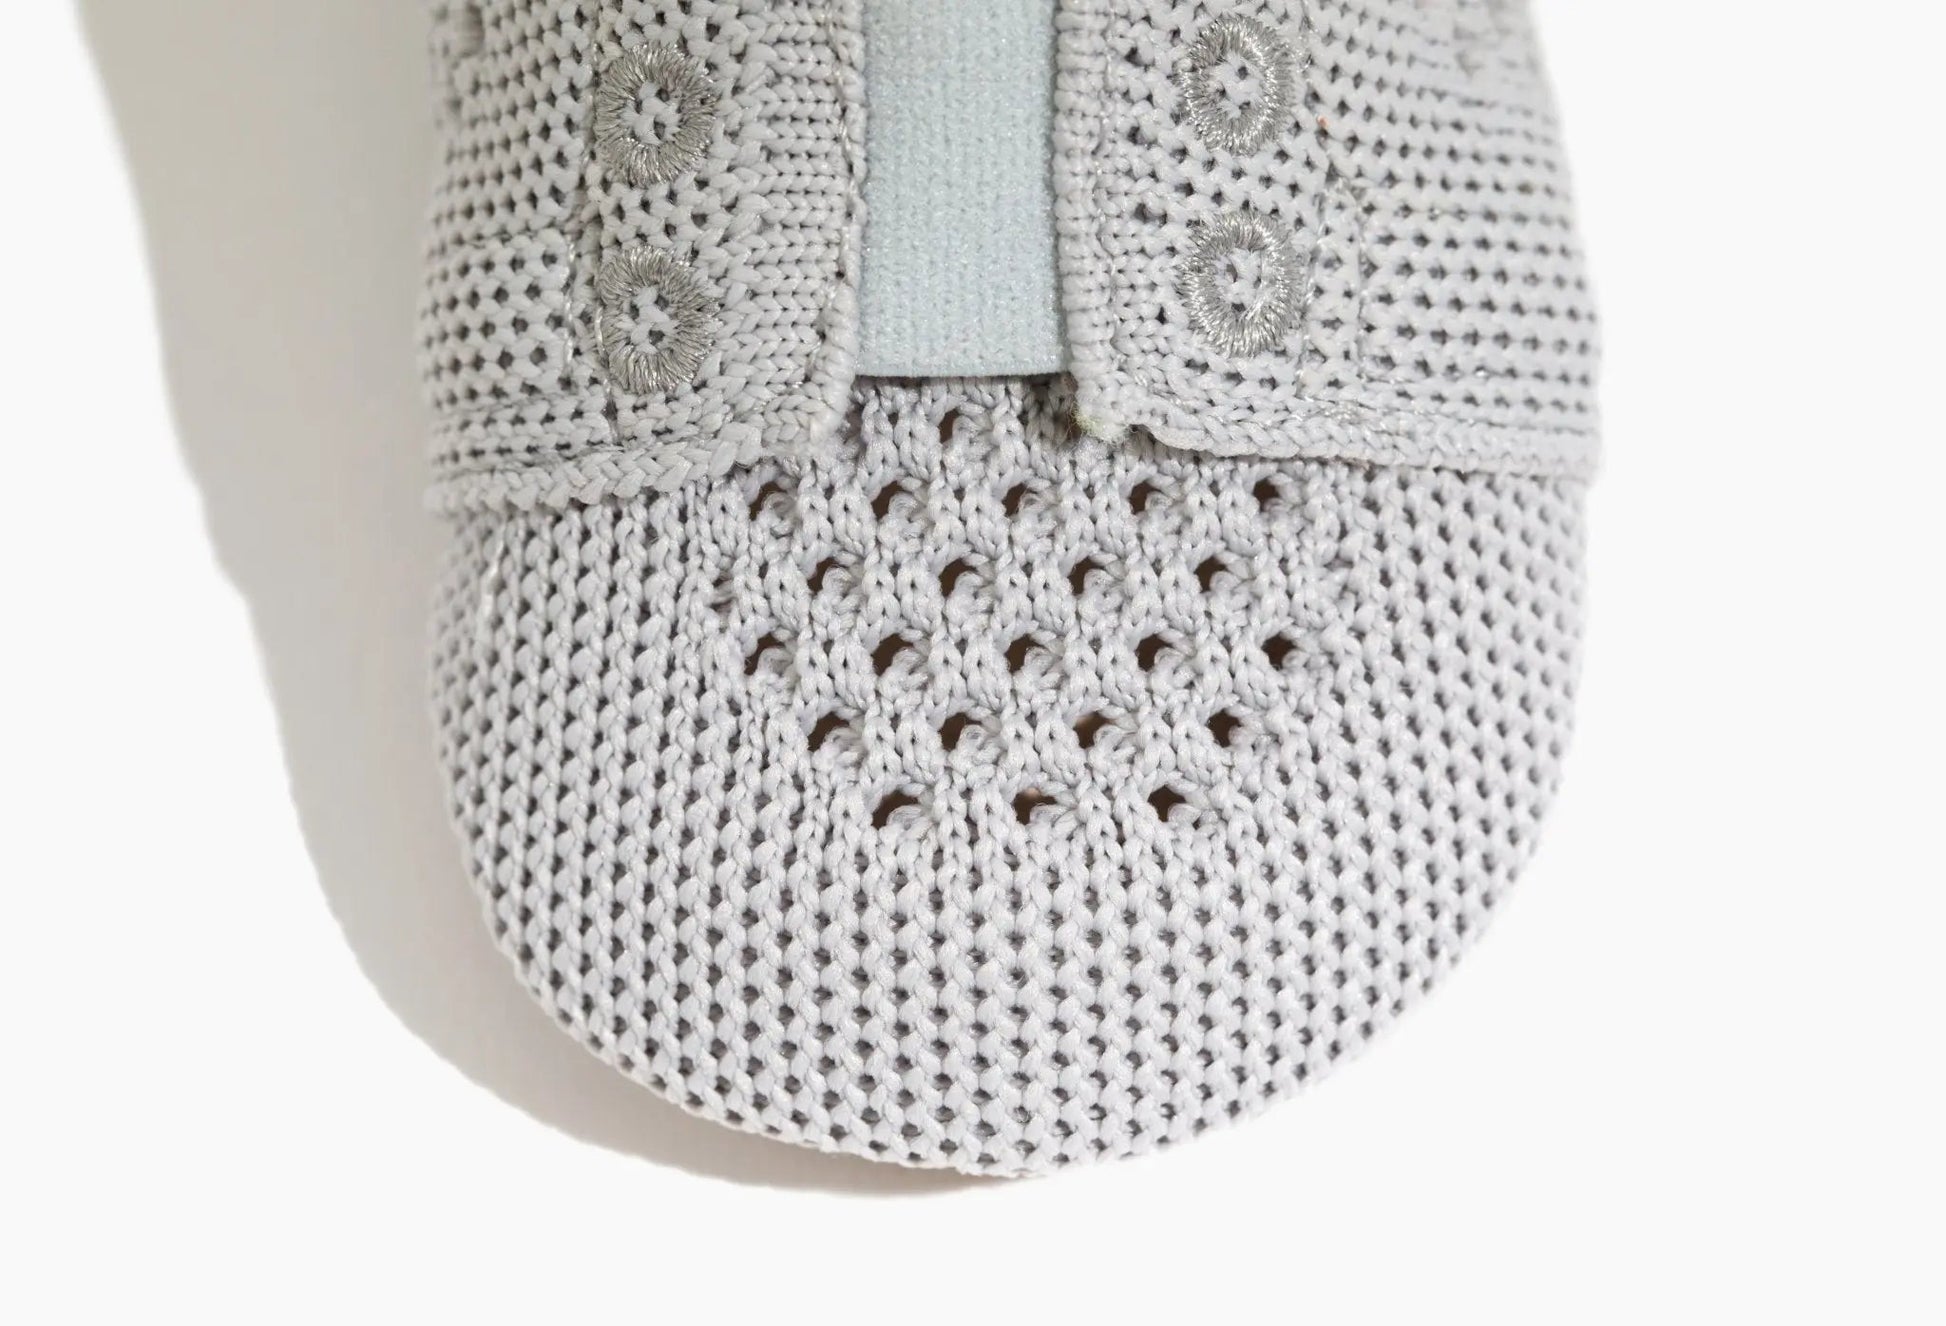 Sidekick Sneaker - Grey/Silver - HARTS Bootees #first shoes# #toddler# #baby# Best first shoes Best shoes for first steps Best shoes for first walkers Besf first walking shoes Shoes for first communion Best shoes for first communion The Best Shoes for Your New Walker The Best Early Walking Shoes for Your Baby